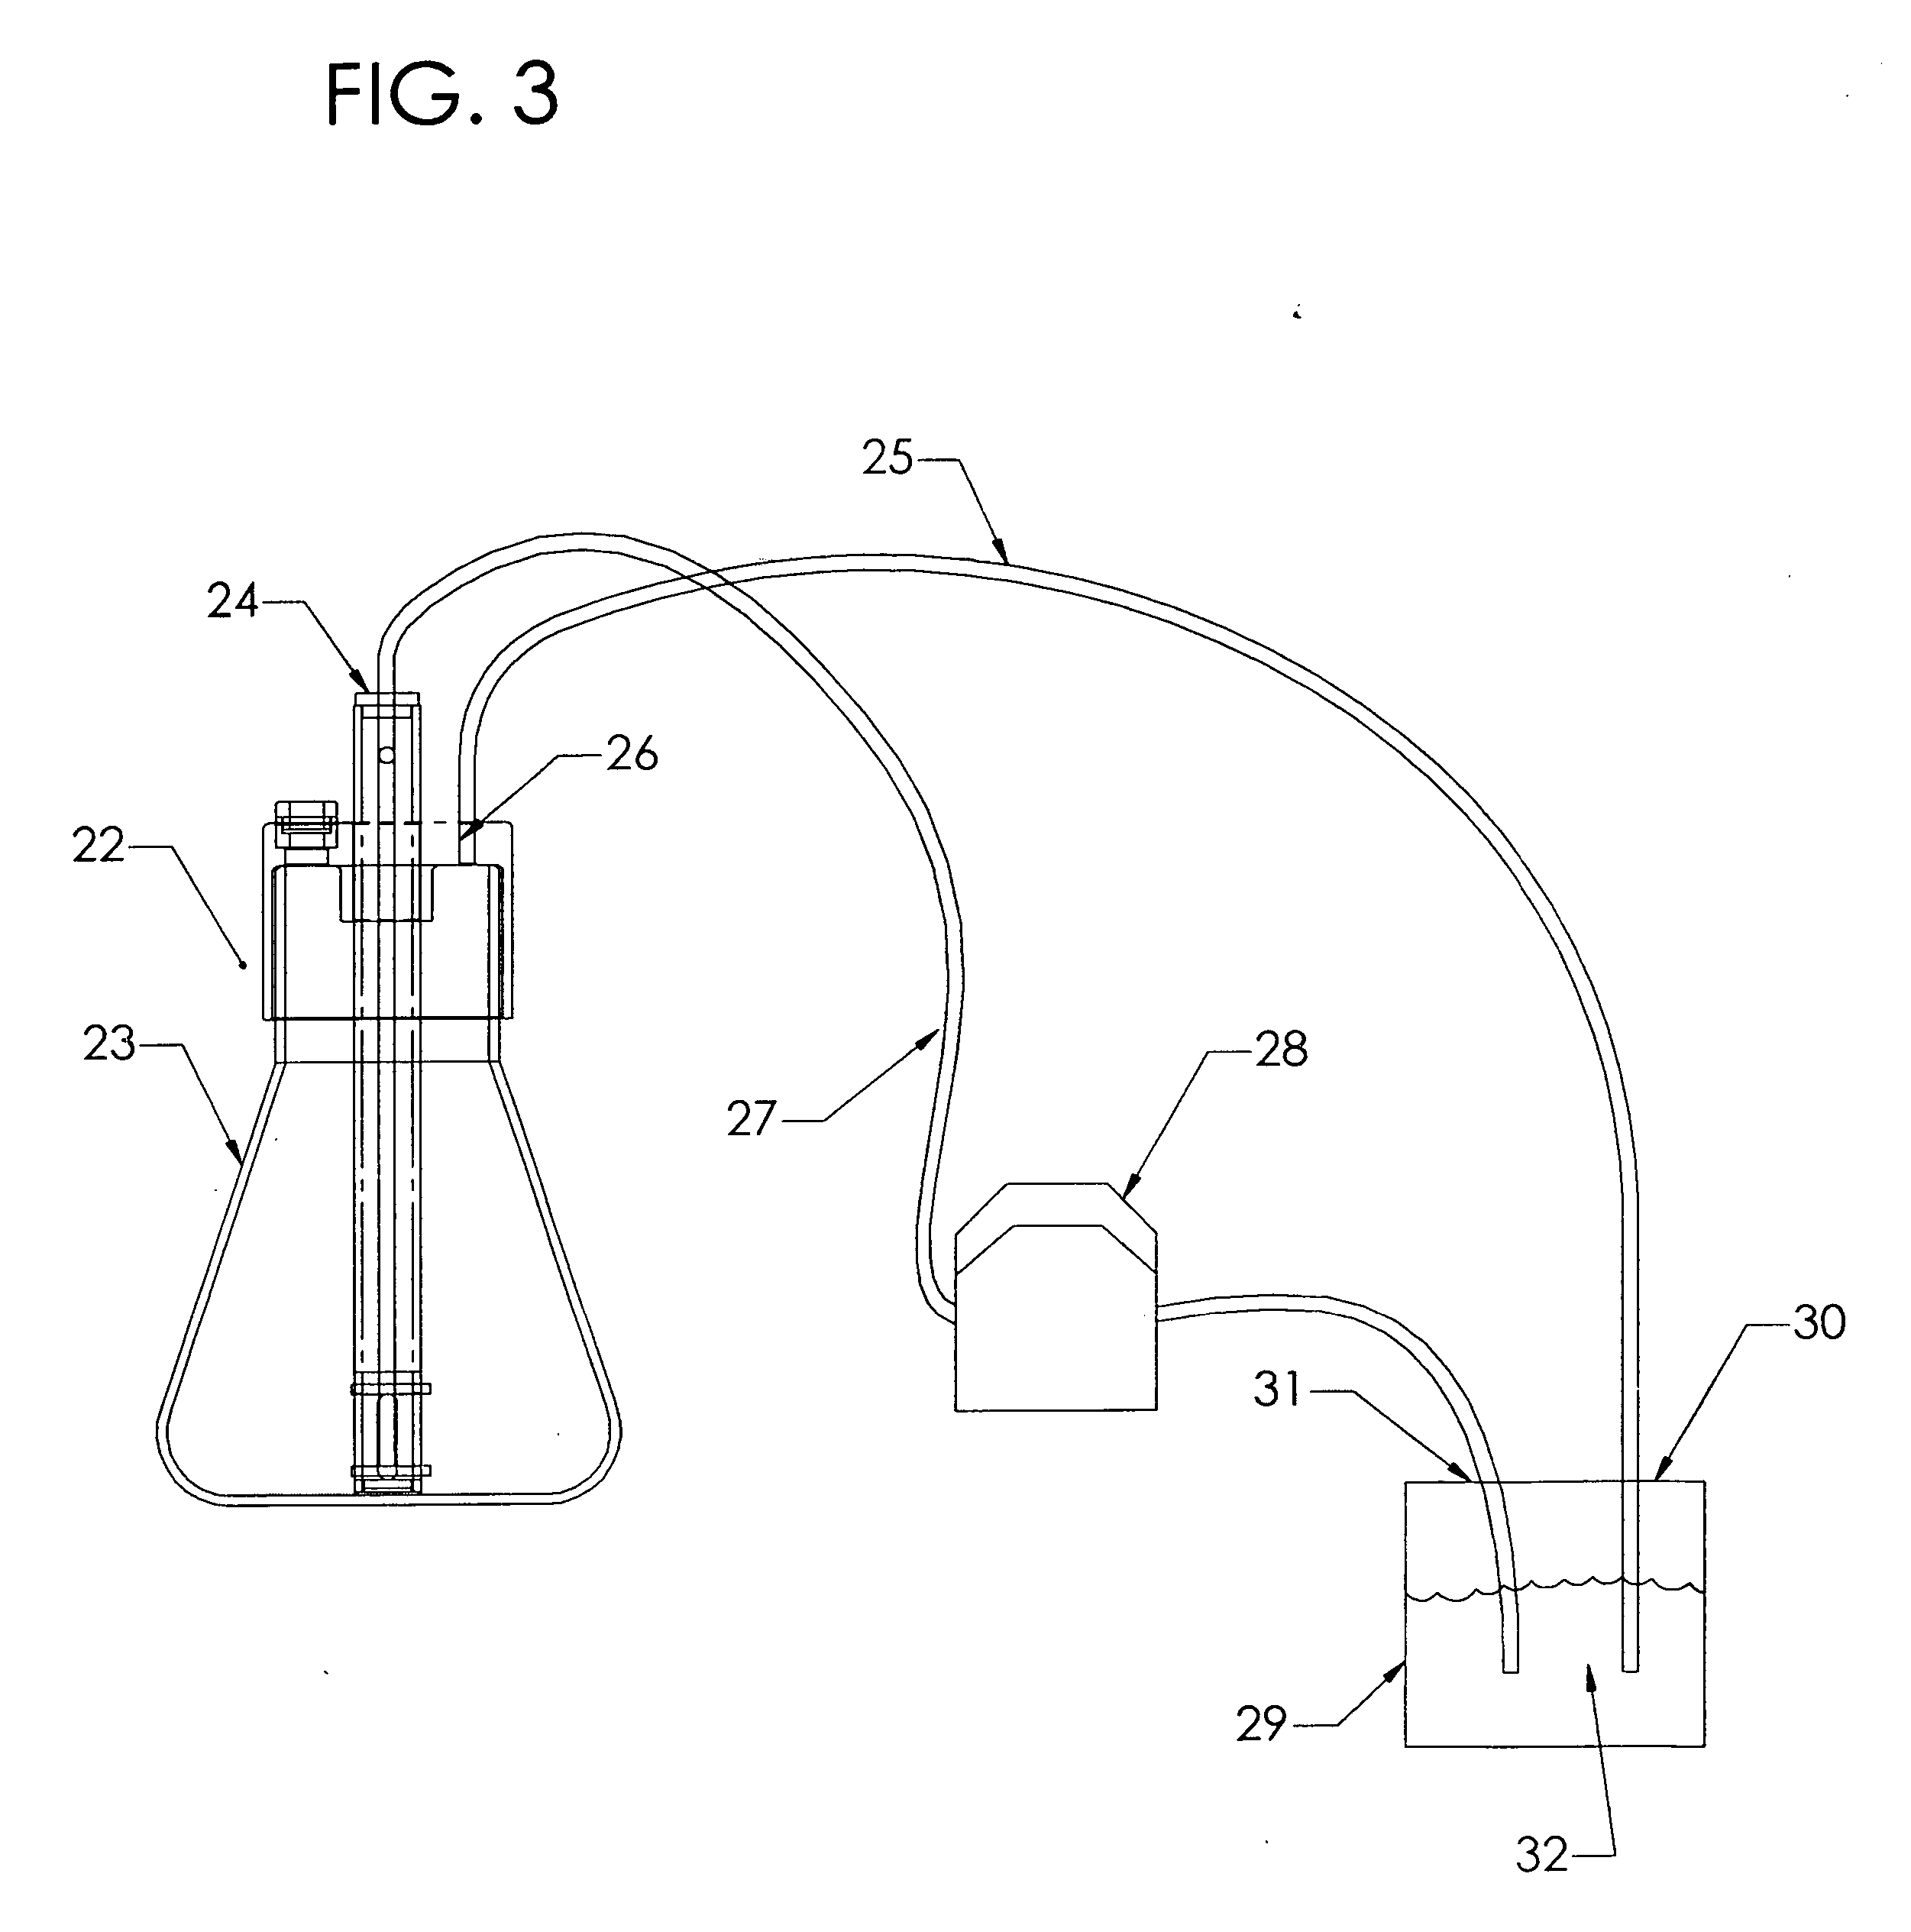 Apparatus for demineralizing osteoinductive bone